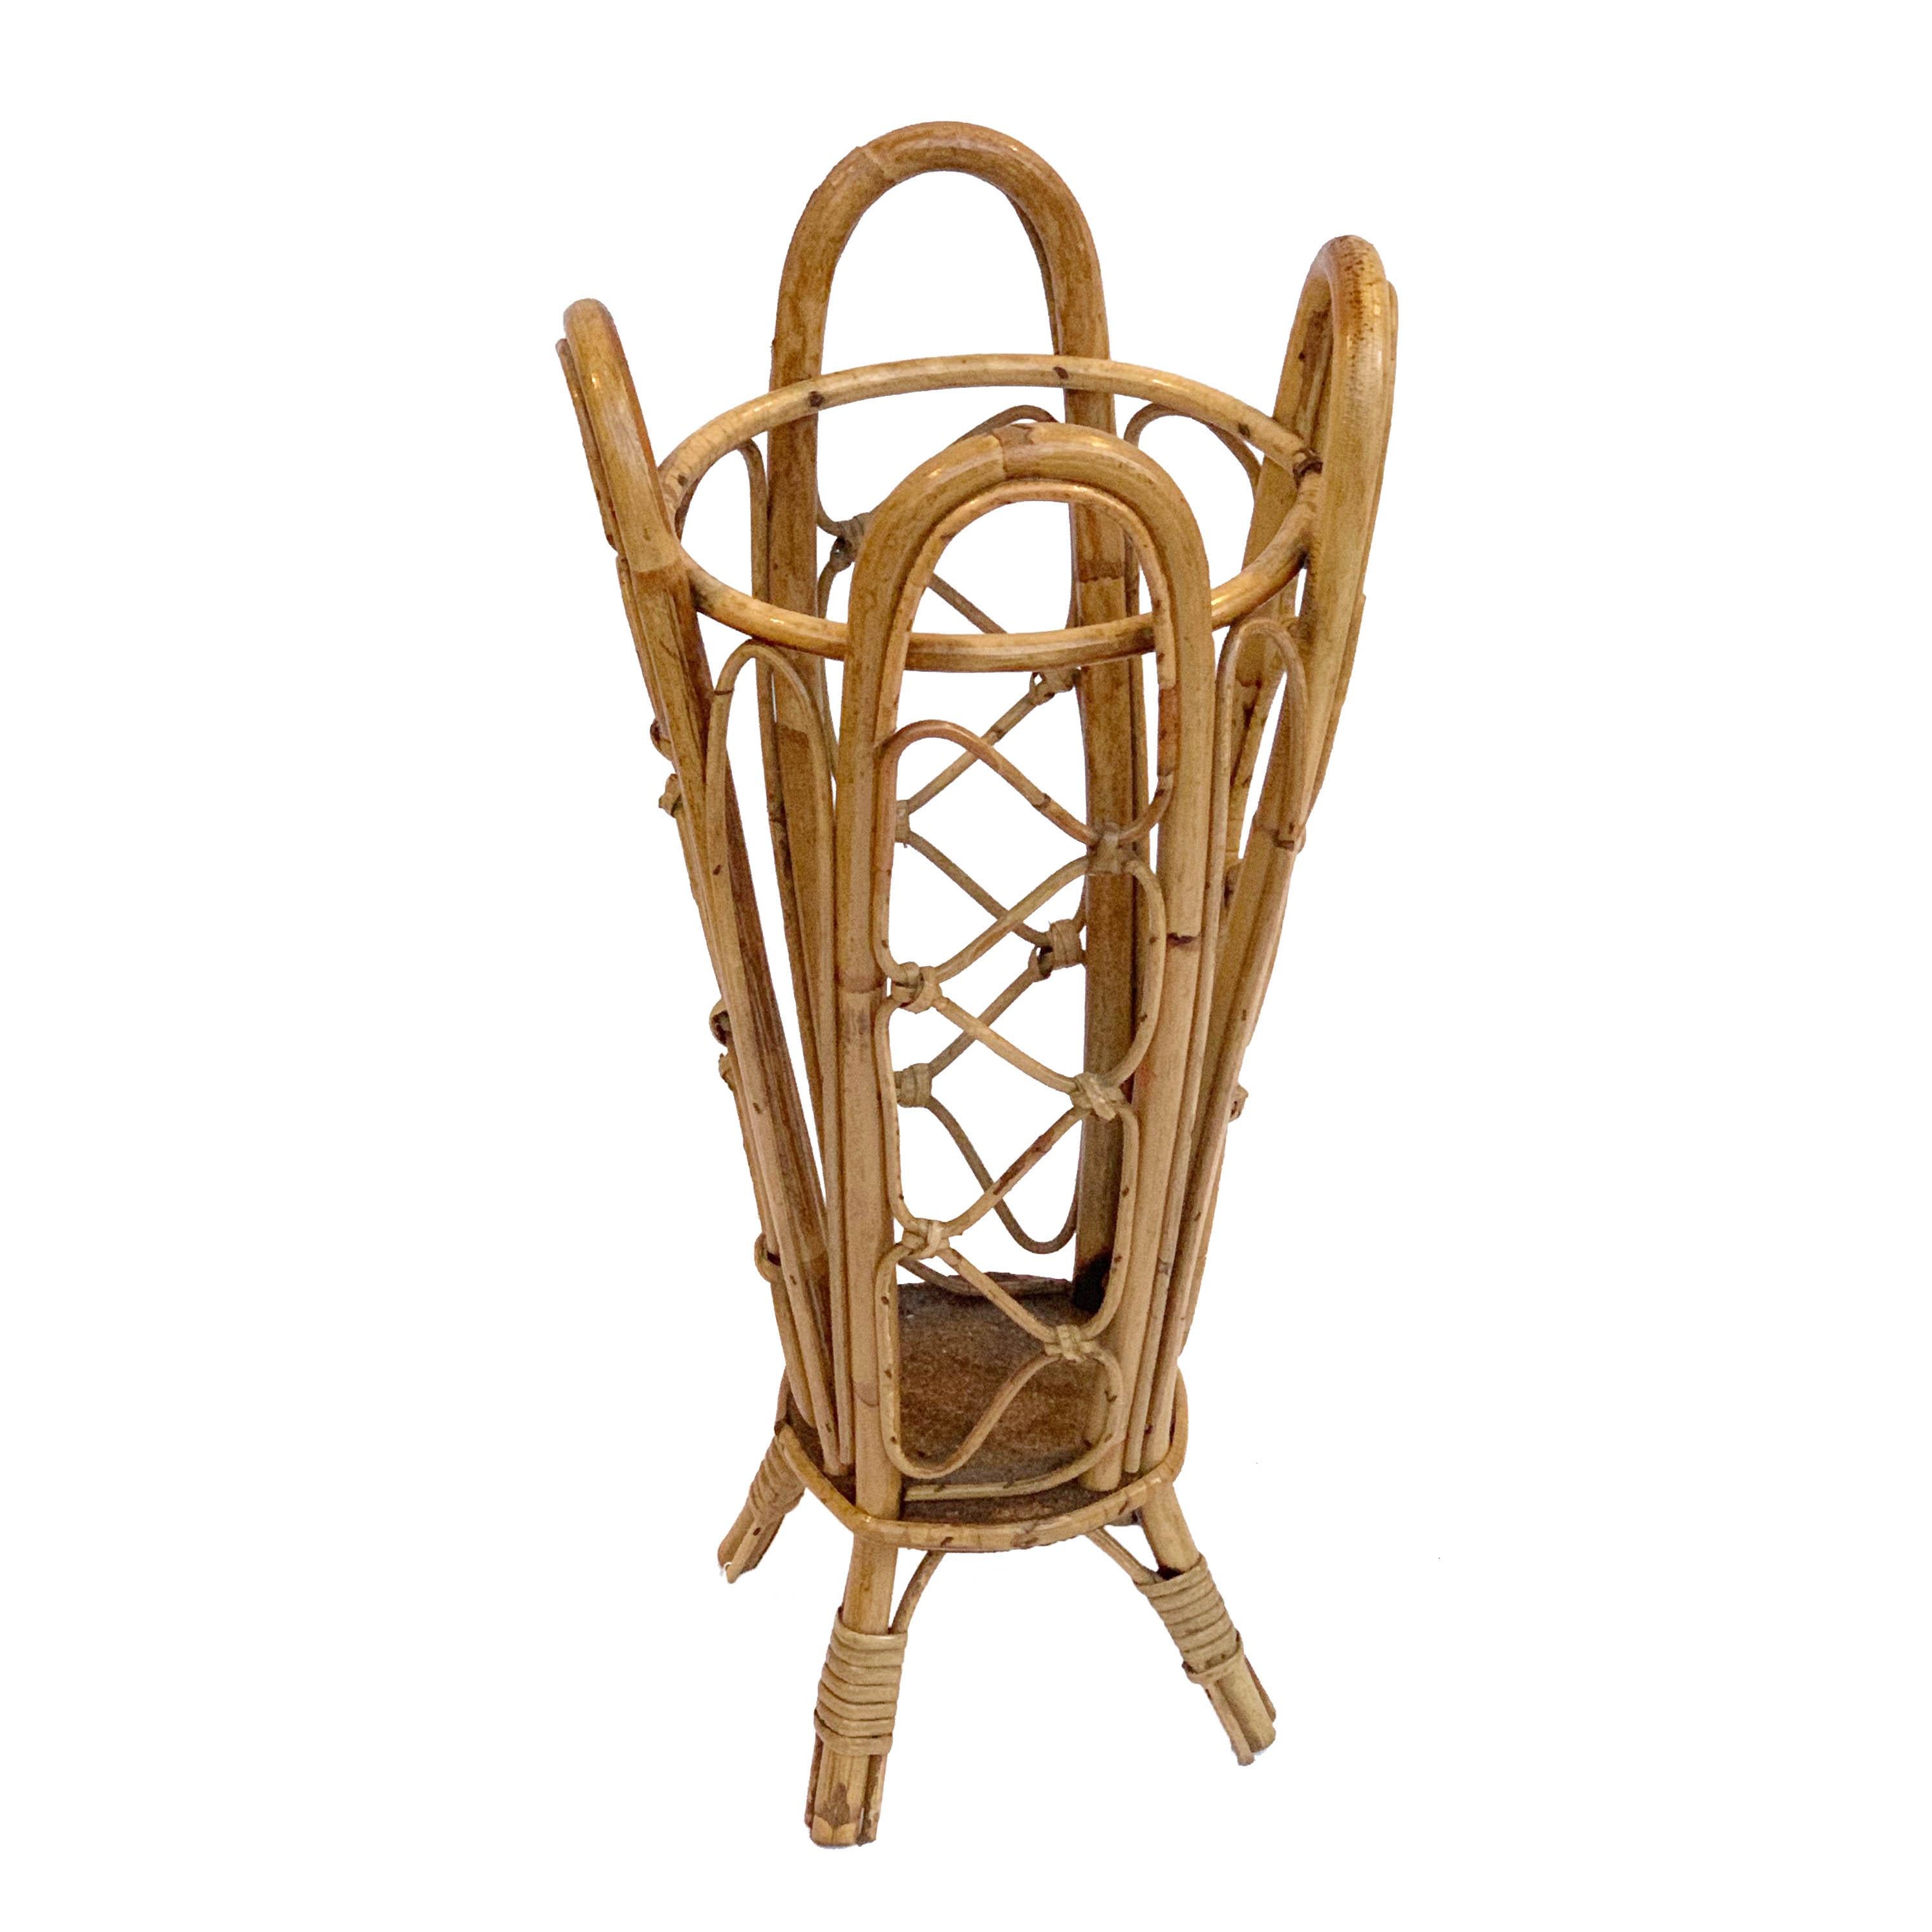 Umbrella stand made of bamboo, Franco Albini style, Italy 1960s.